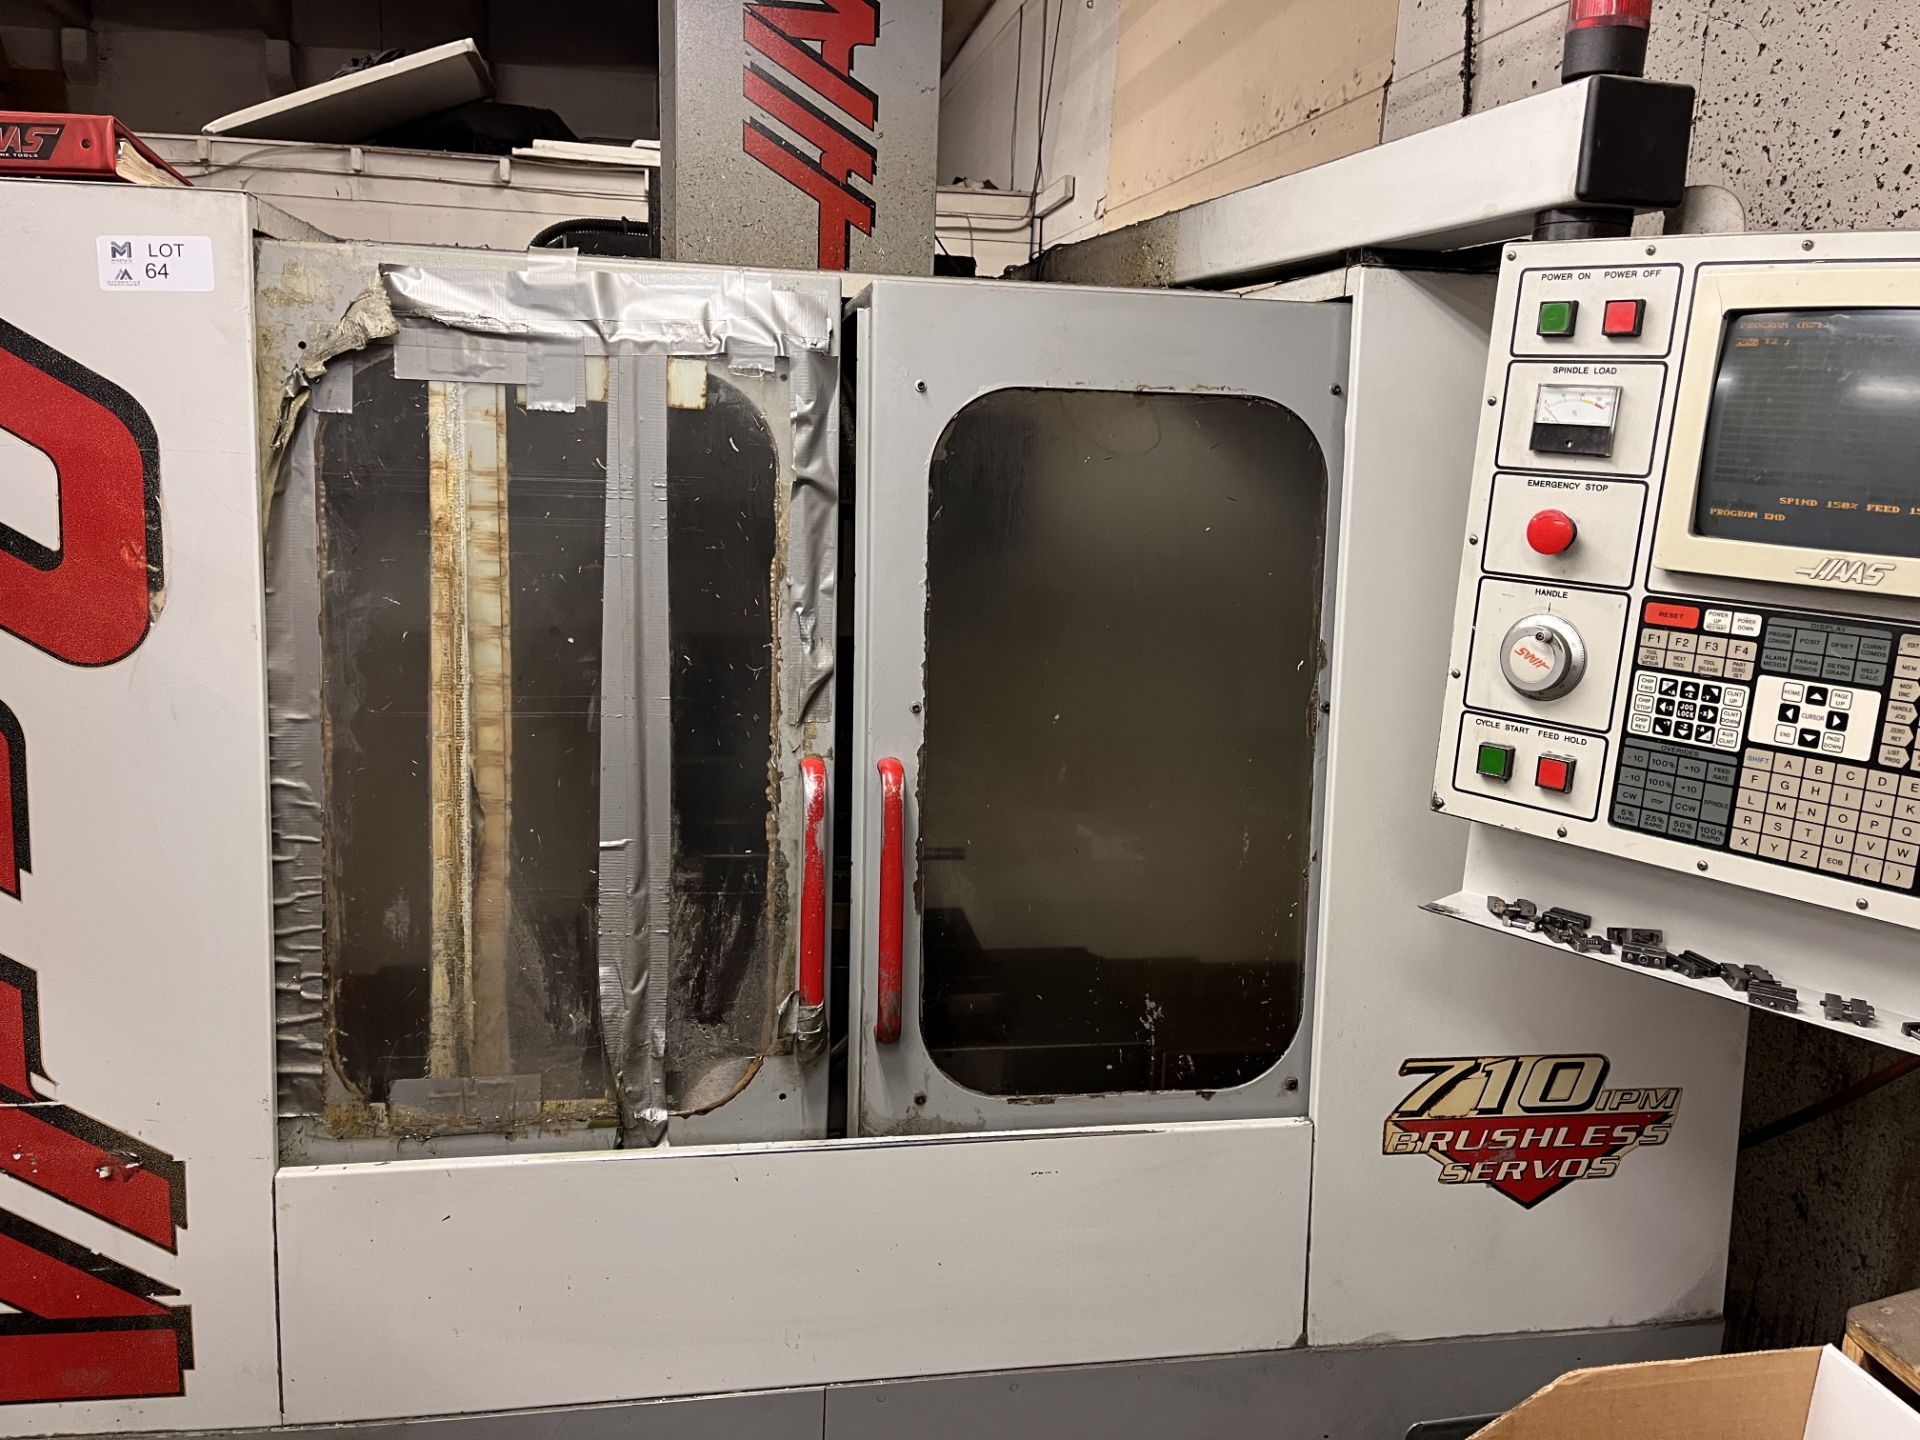 1996 Haas VFO CNC Vertical Machining Center - Image 3 of 13